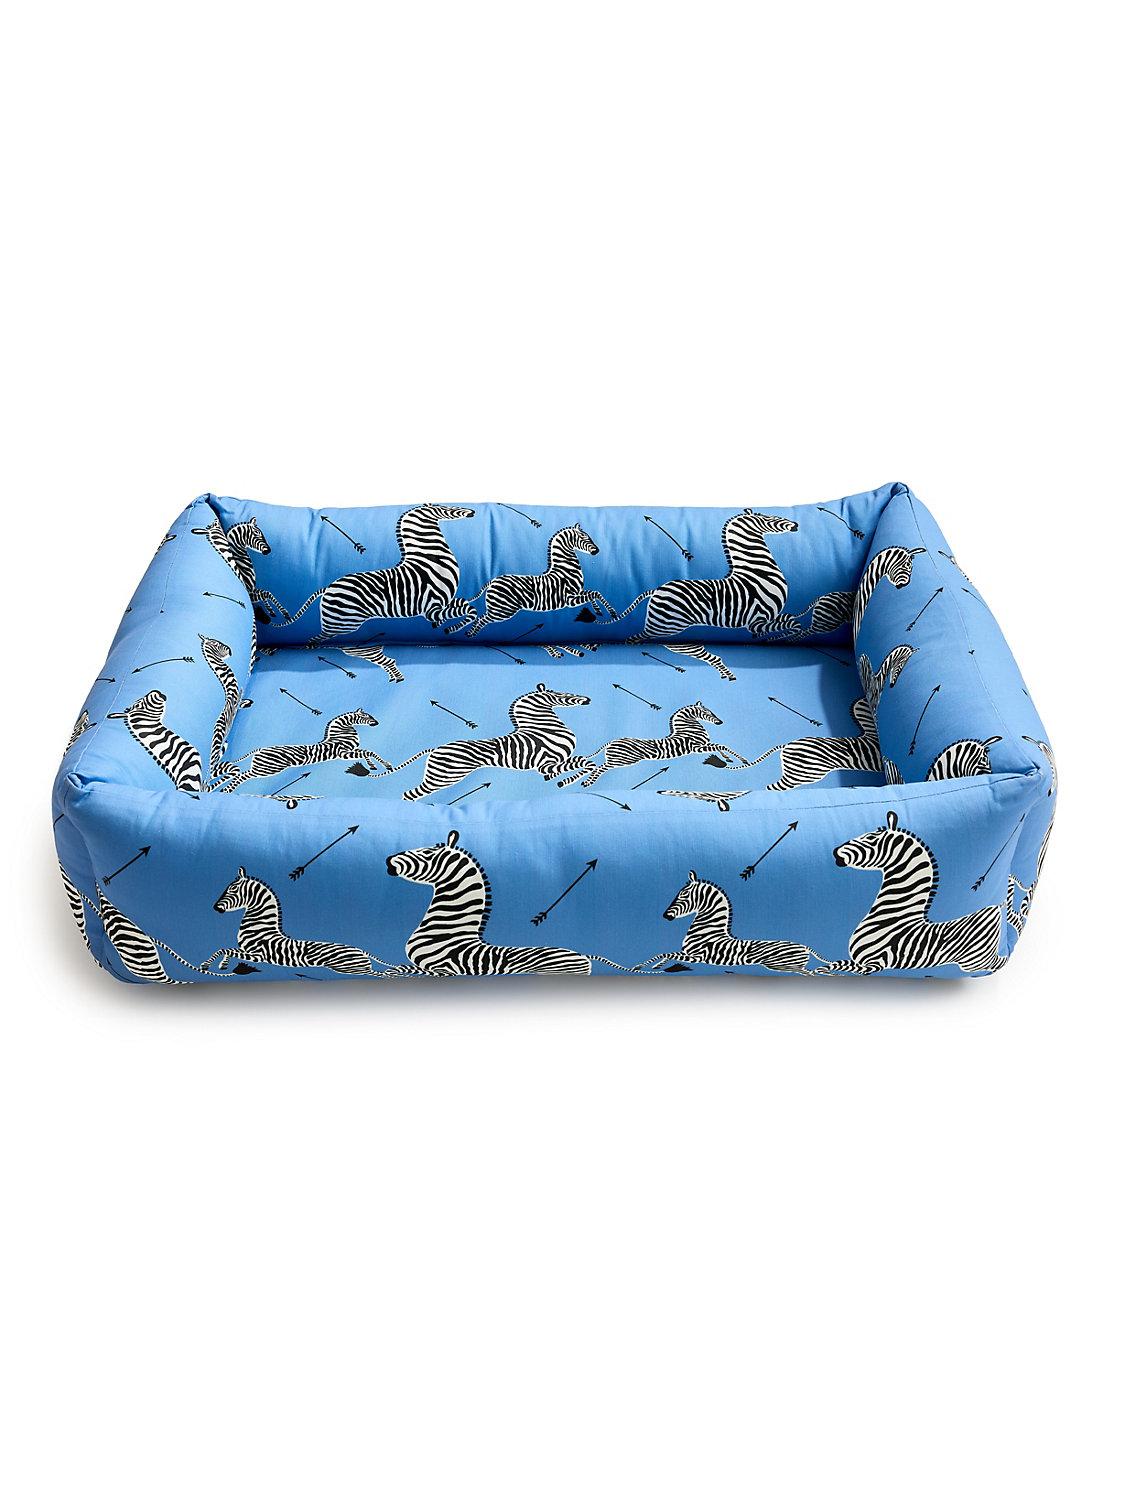 Scalamandre Zebras Dog Bed Small For Sale